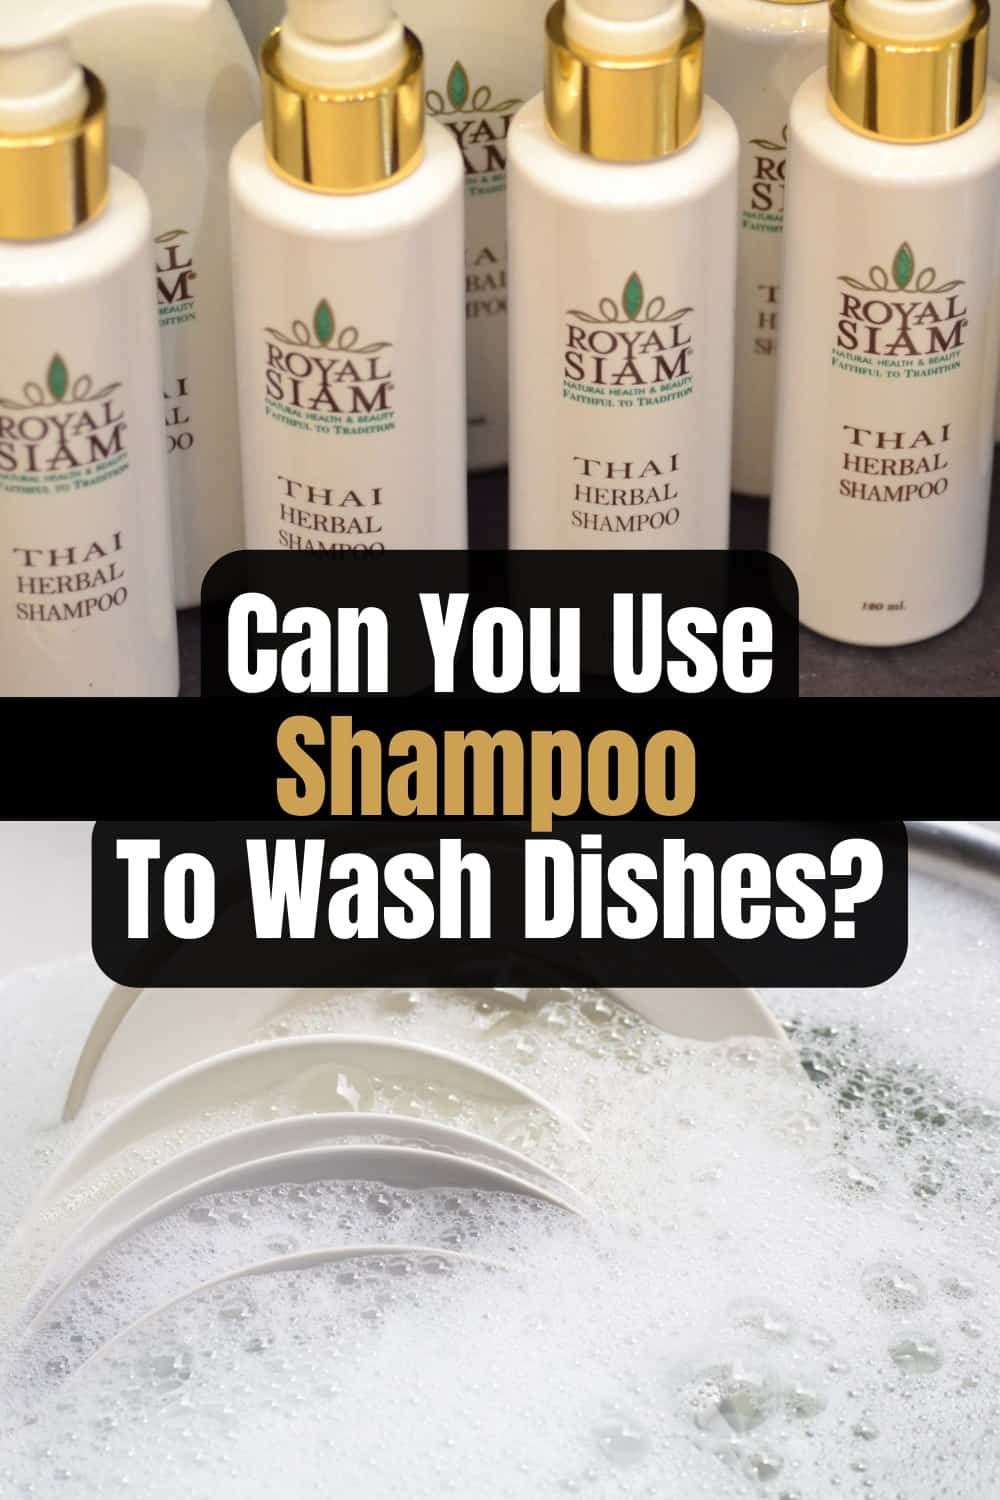 You can use shampoo to wash dishes